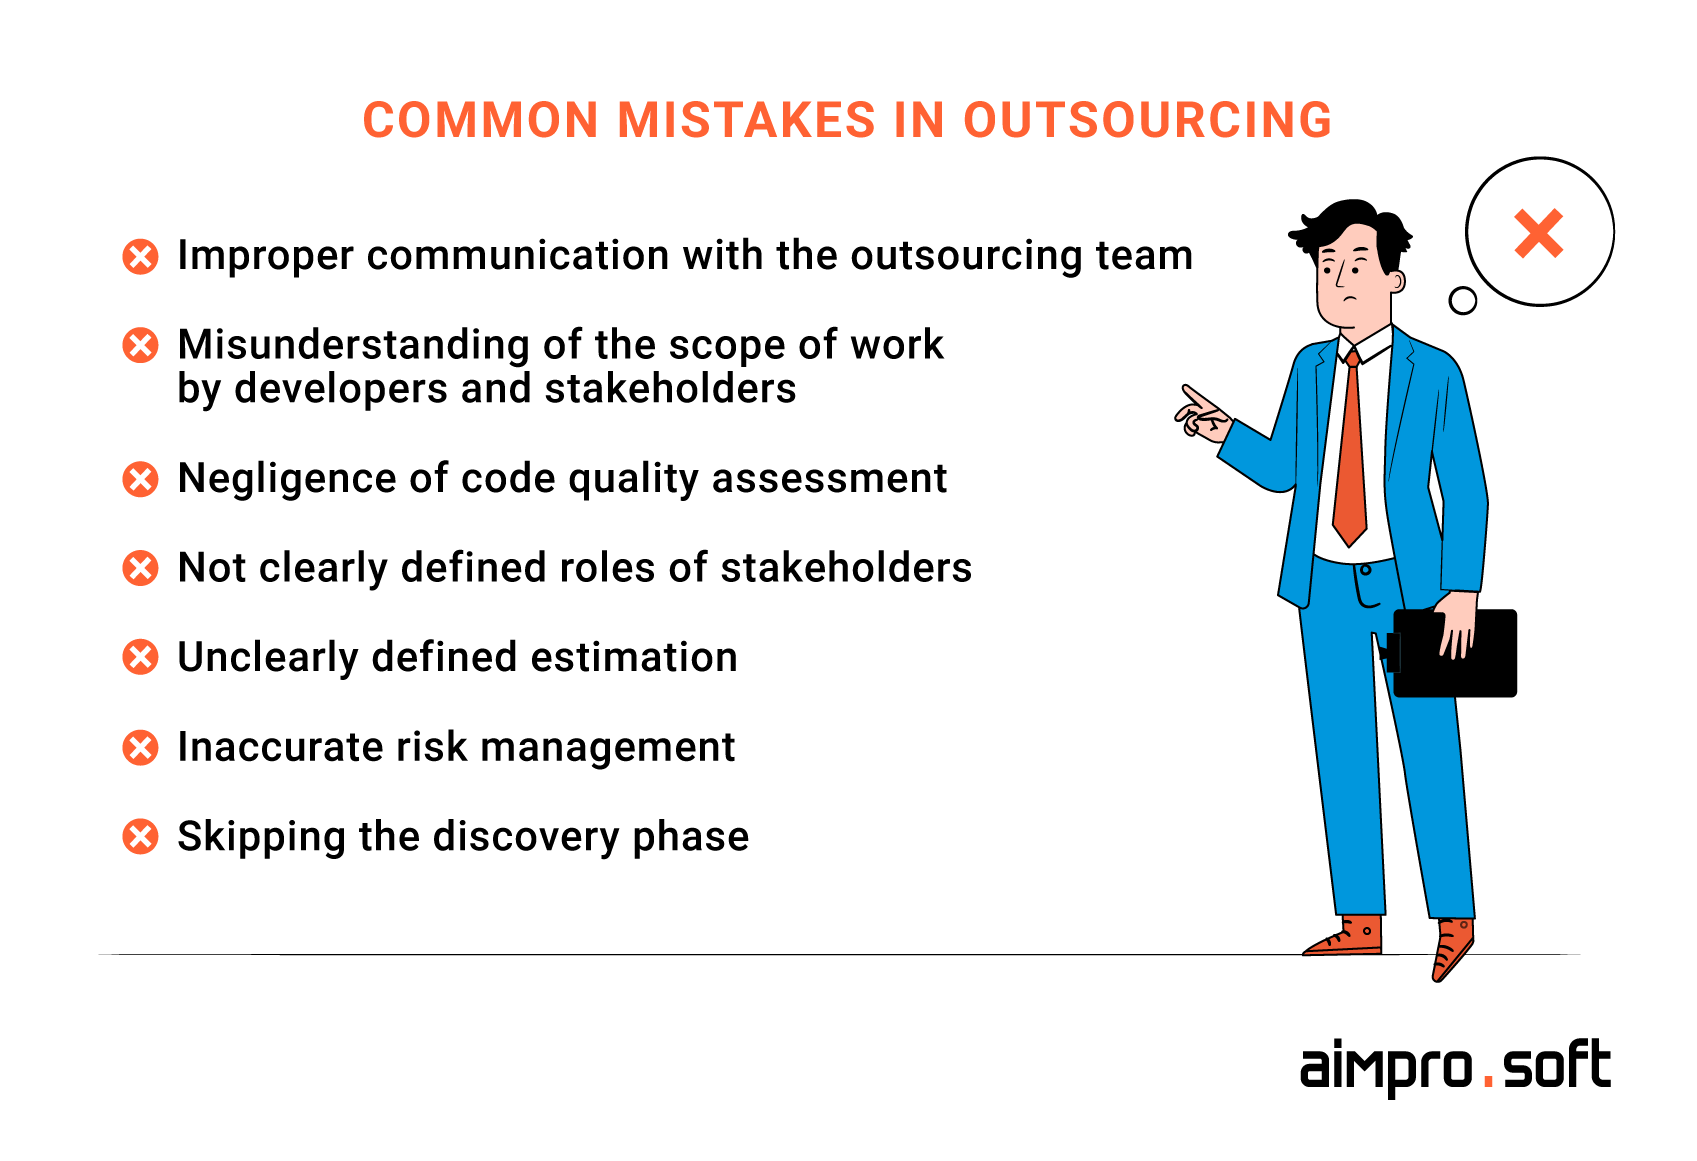 Common mistakes in outsourcing